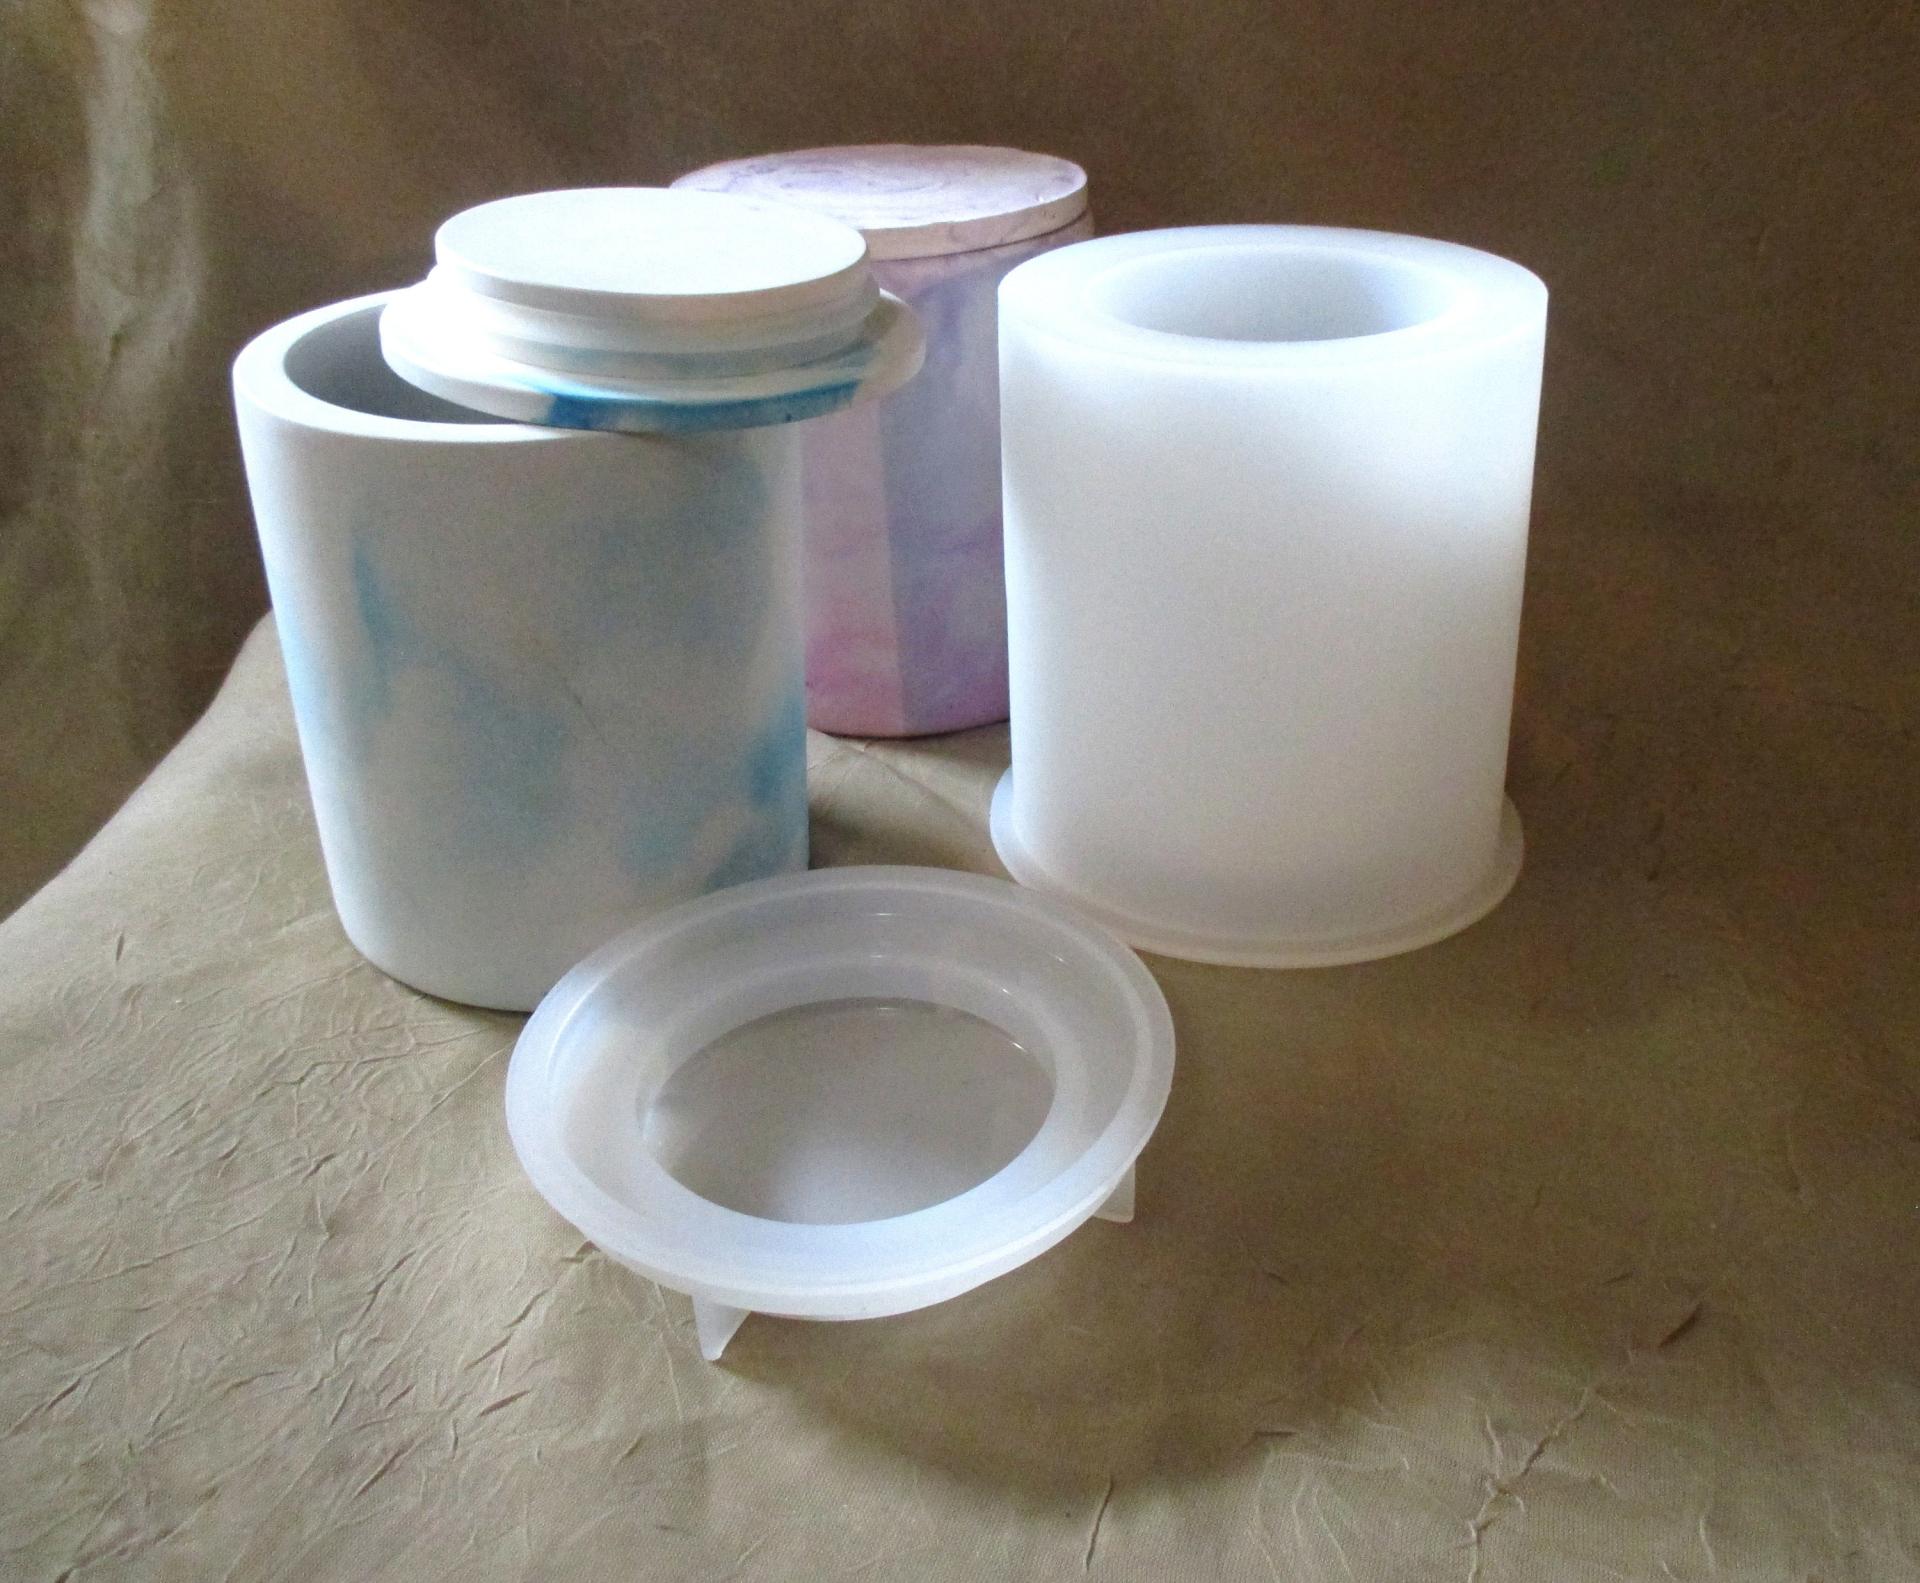 Mold - Candle Jar Casting Mold - for Concrete, Cement, Epoxy, Clay or other casting medium